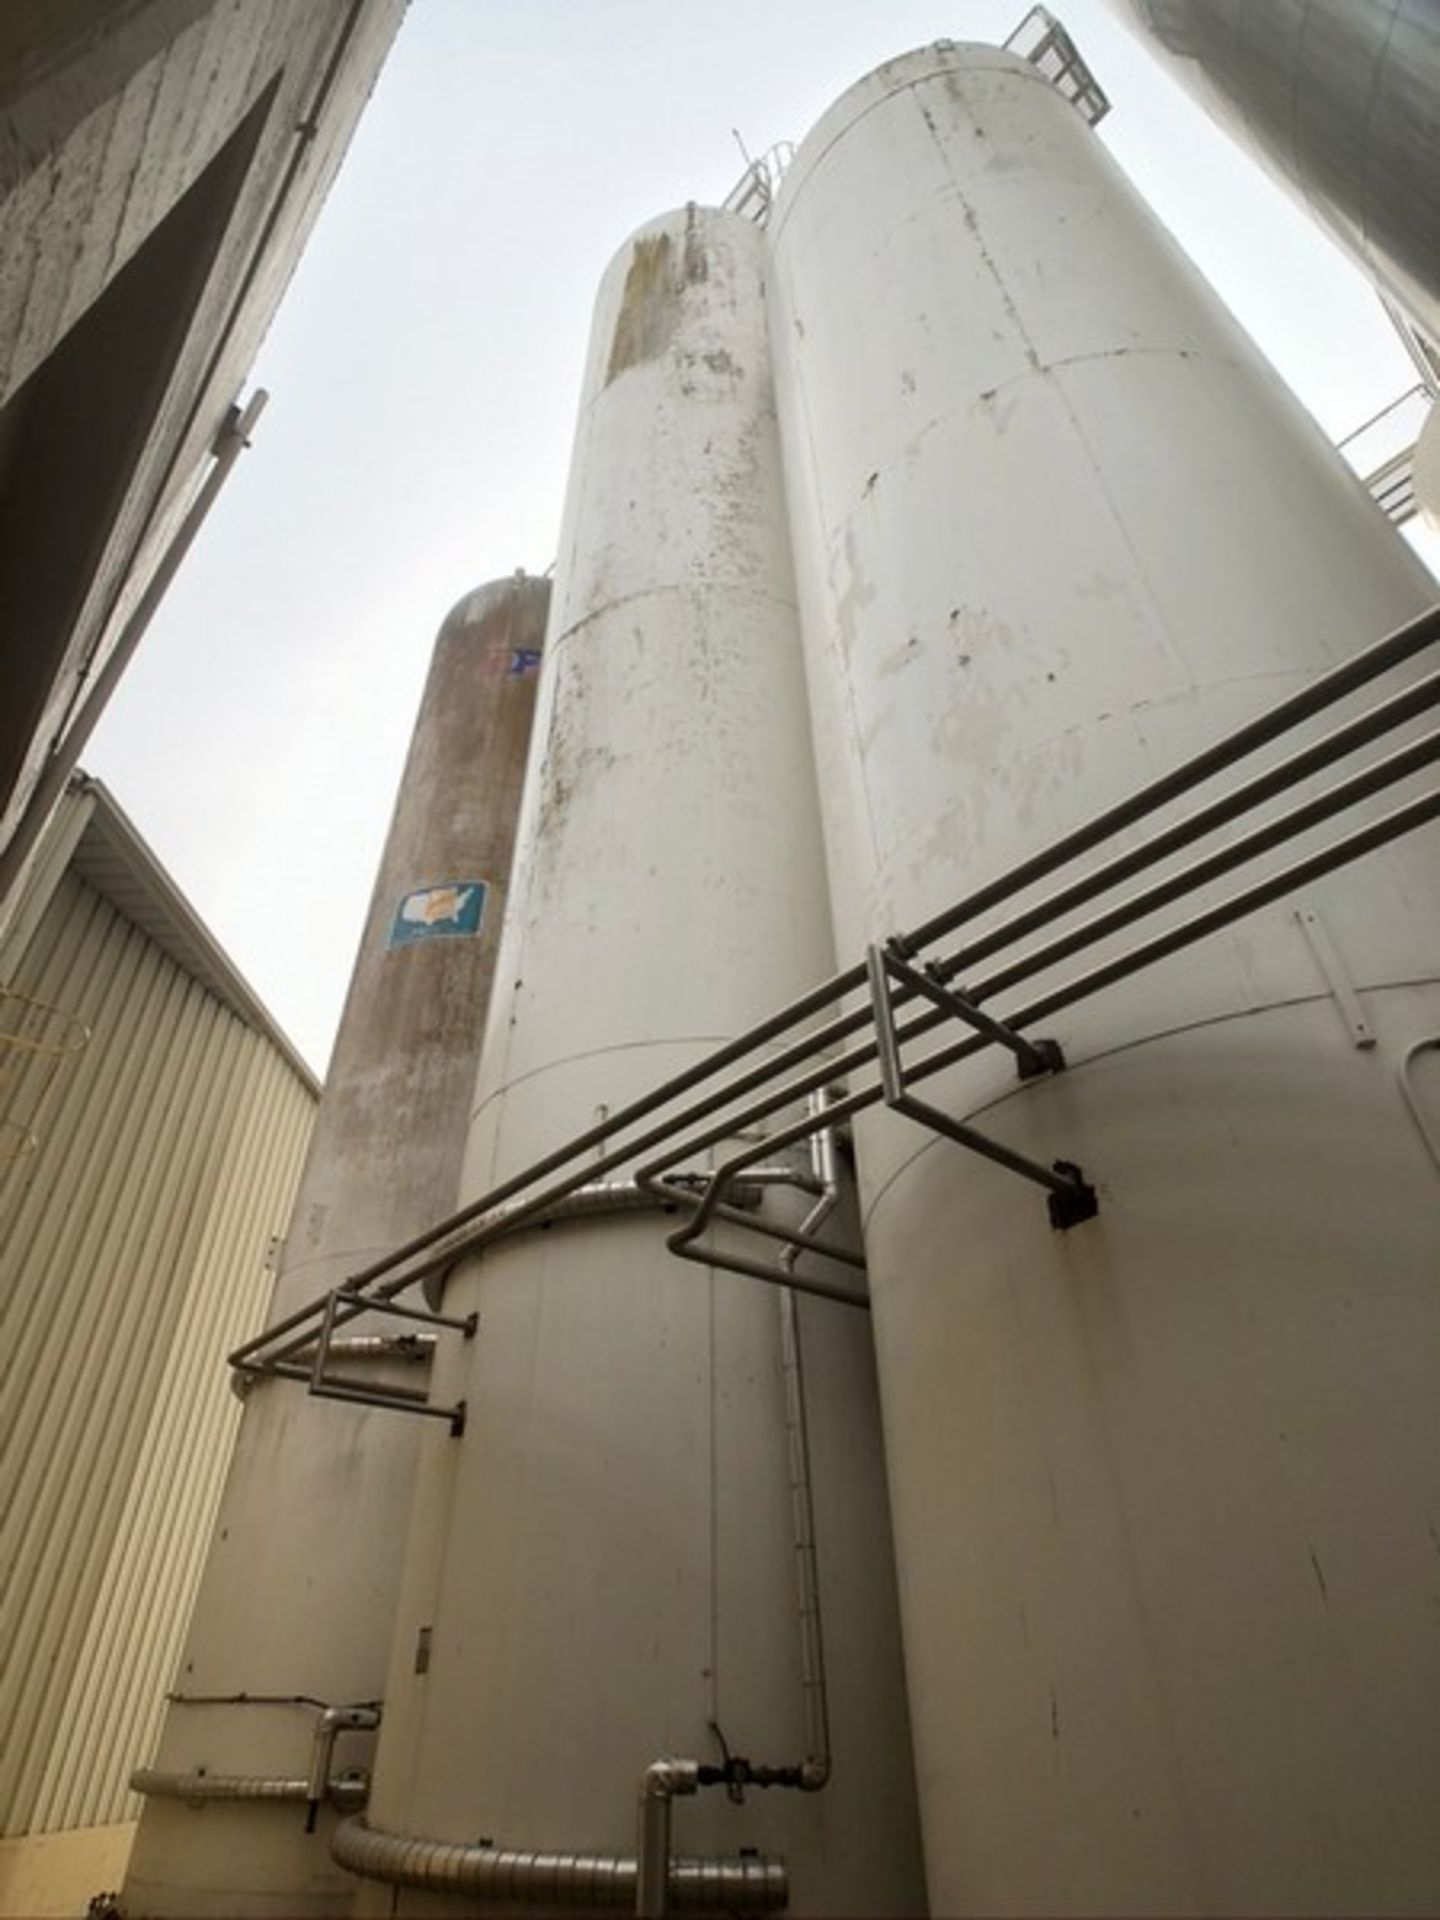 MUELLER 60,000 GALLON JACKETED SILO, S/N 110549, HORIZONTAL AGITATION (RIGGING, SITE MANAGEMENT - Image 13 of 30